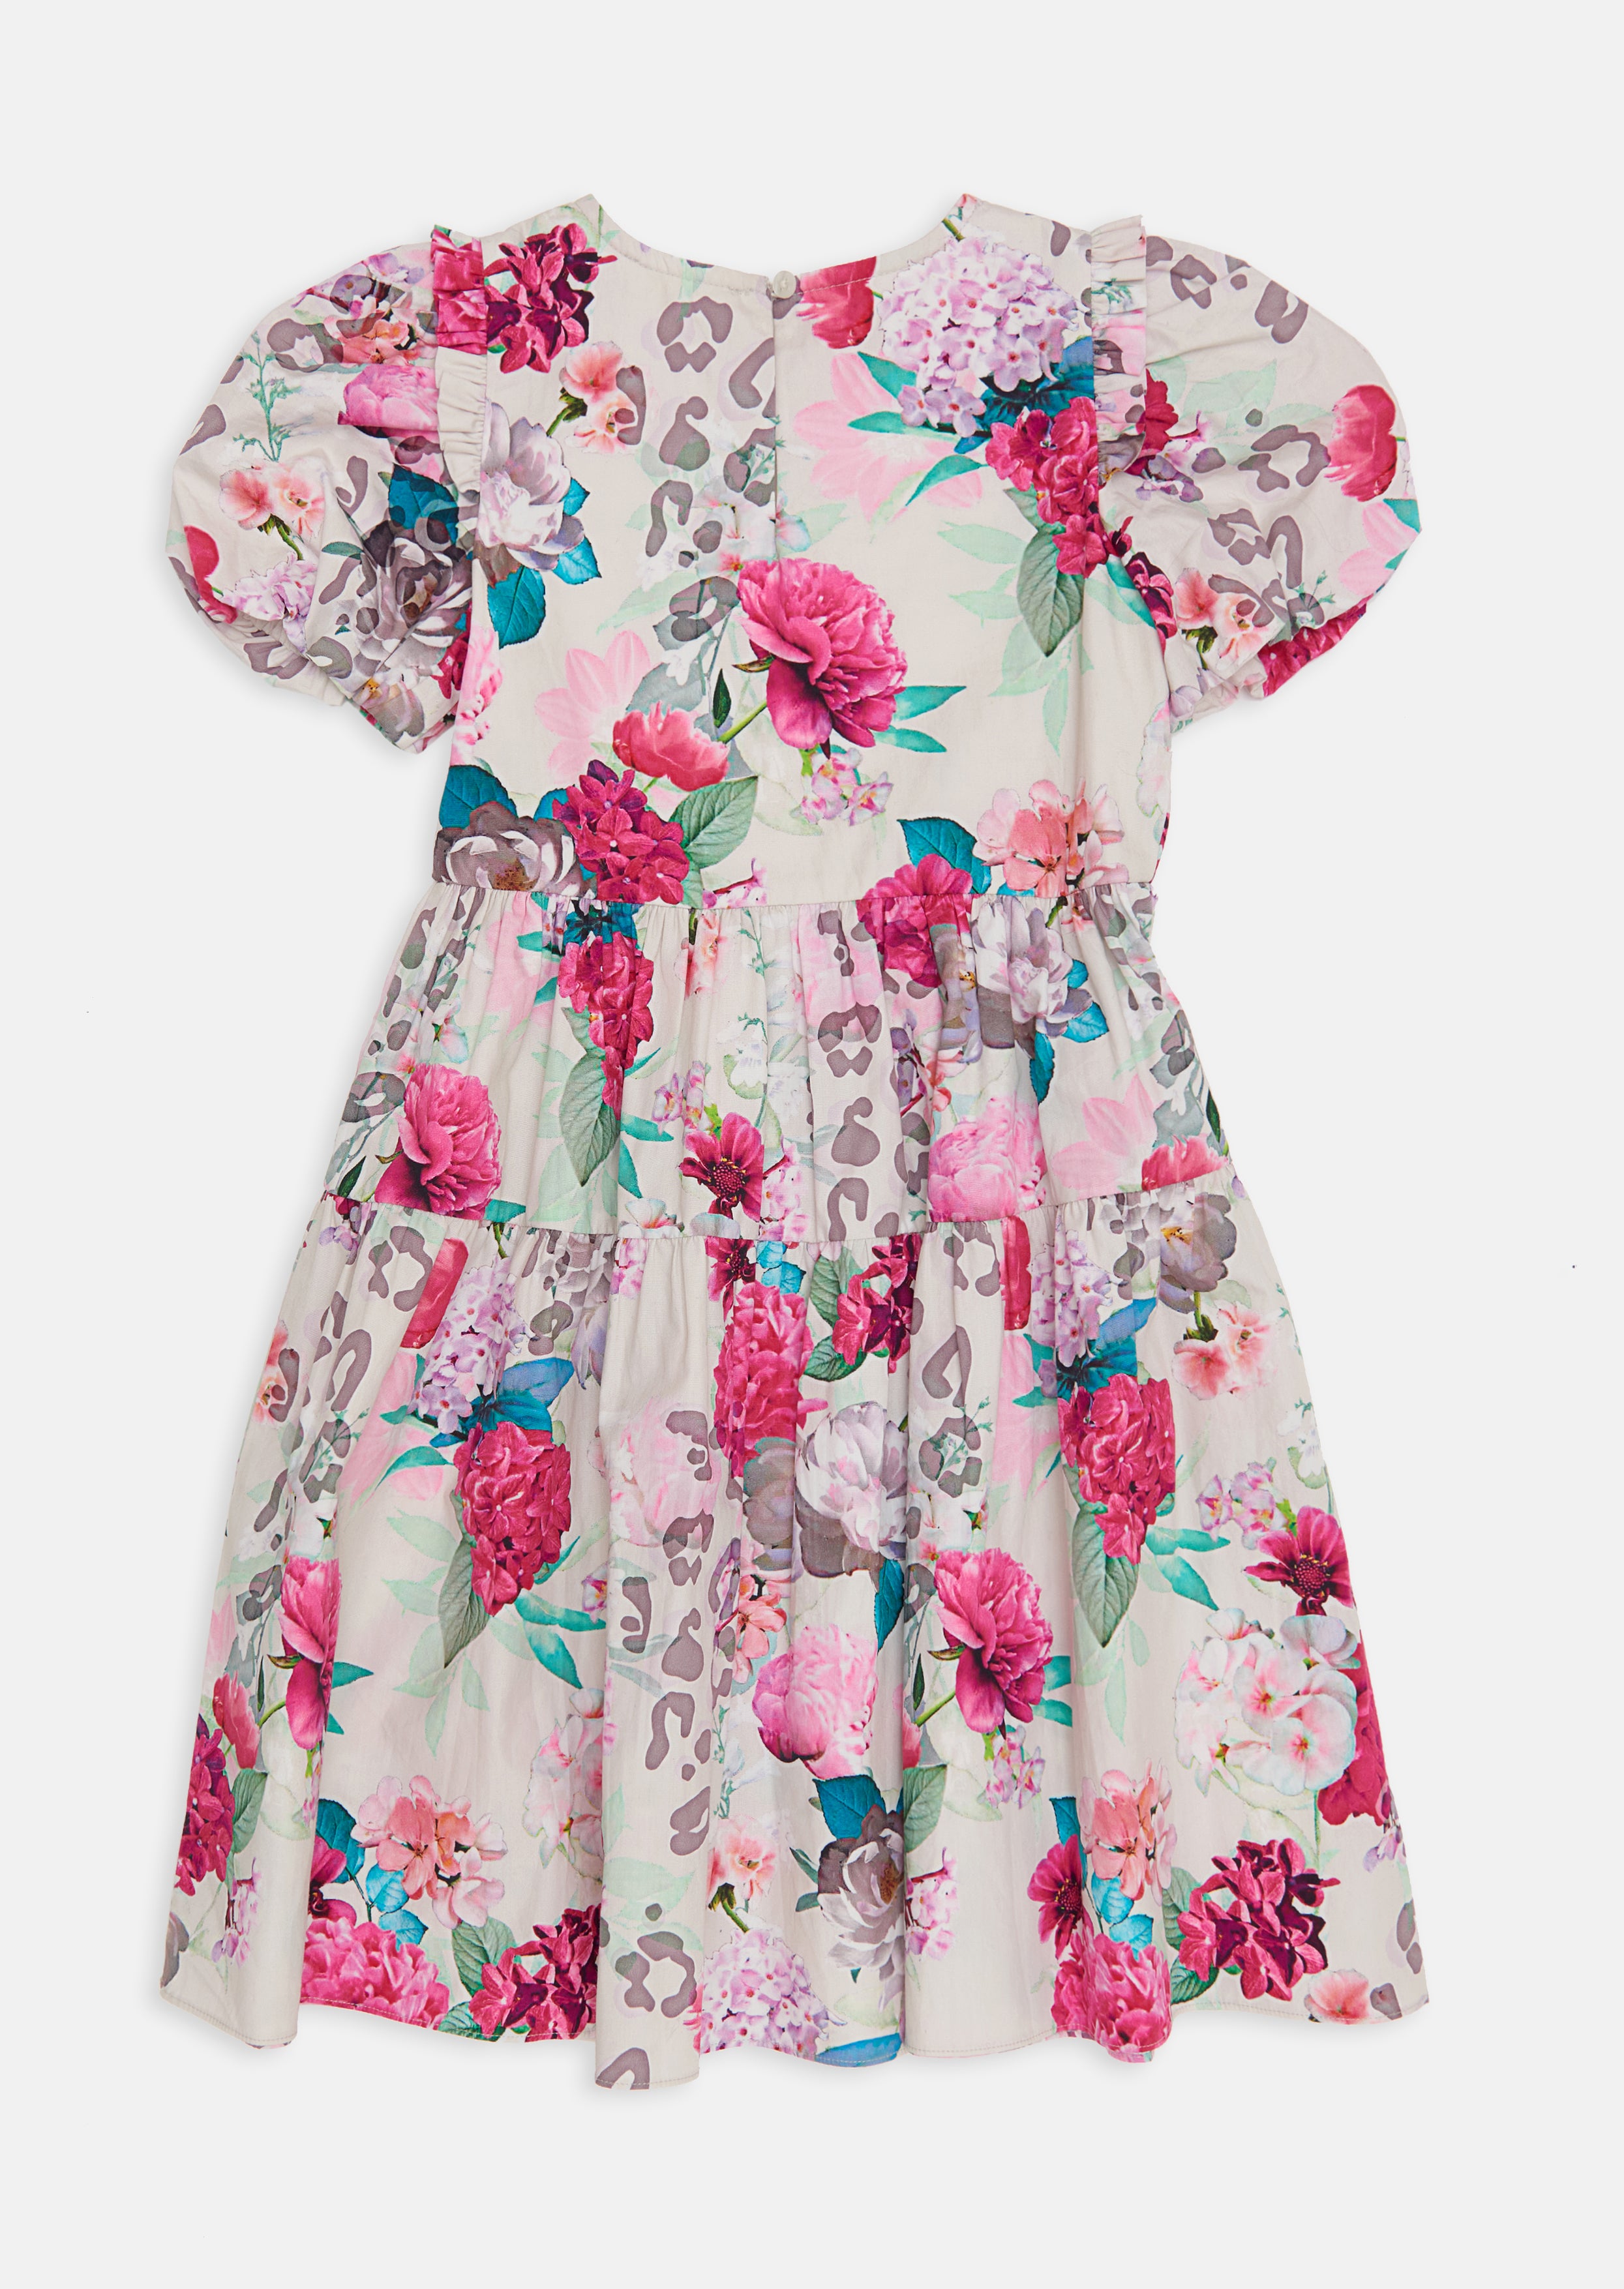 Girls Puff Sleeves with Floral Printed Pink Dress